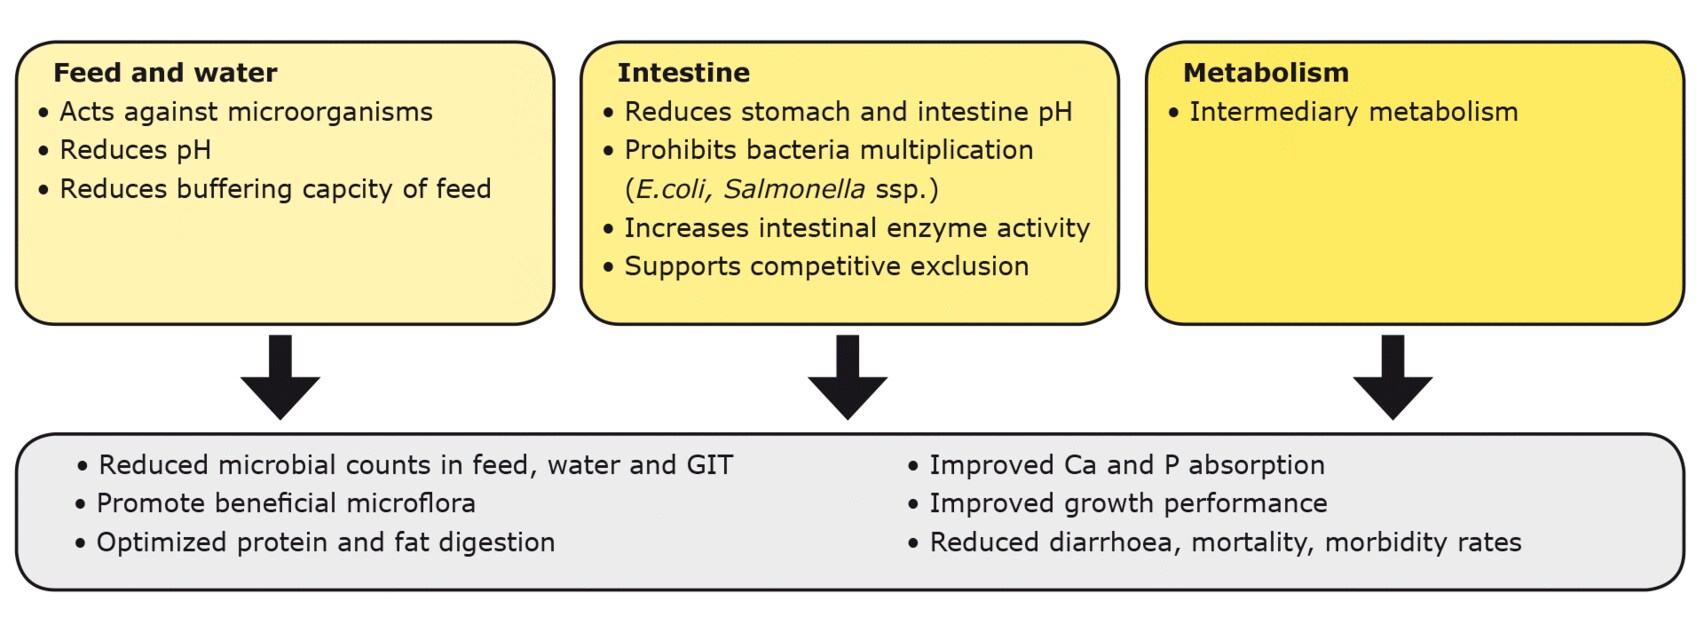 Figure 2. Mechanisms of organic acids in feed, water, gastrointestinal tract and intermediary metabolism.